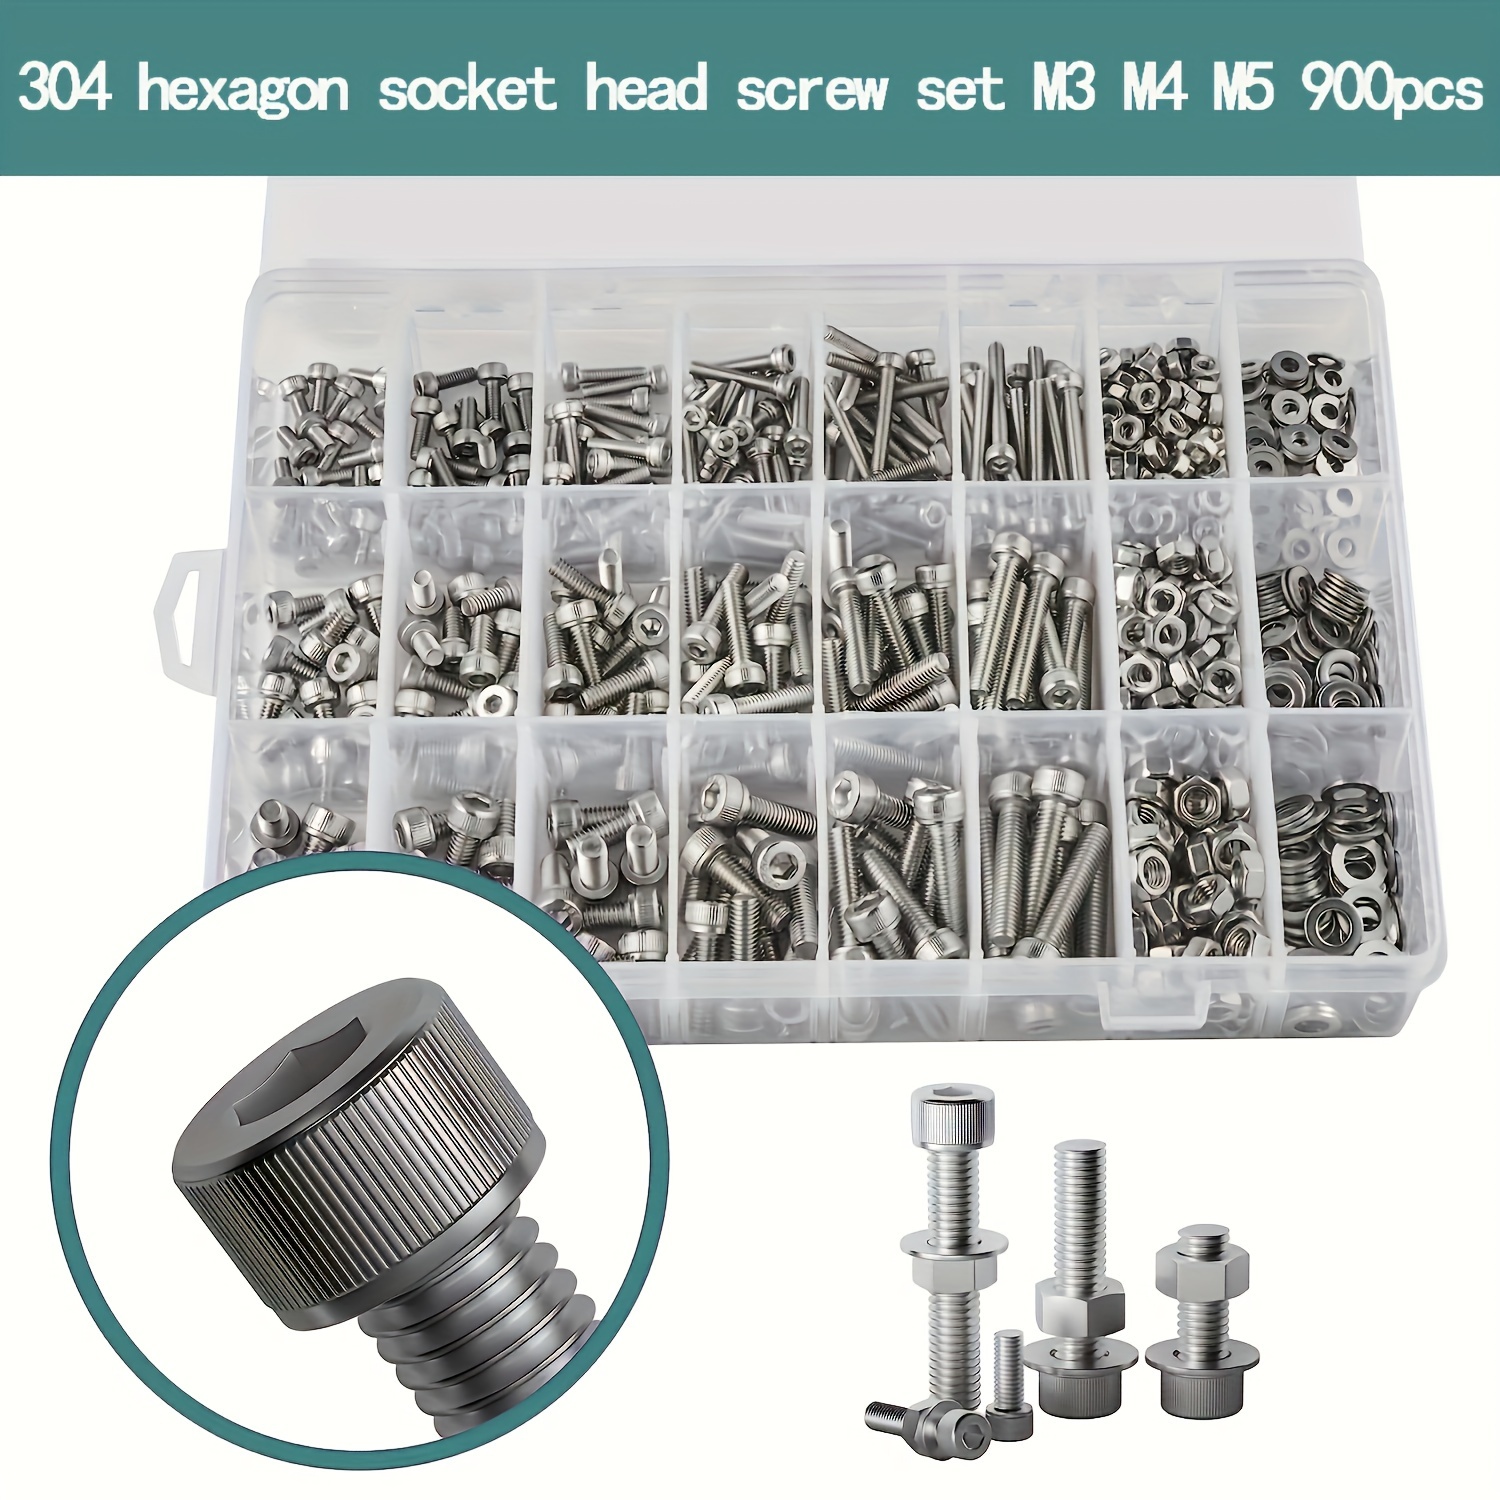 Complete 304 Stainless Steel Bolts & Nuts Kit - 912pcs M3 M4 M5 M6 Hex  Socket Head Screws Assortment Set with Washers & Nuts for DIY Projects.